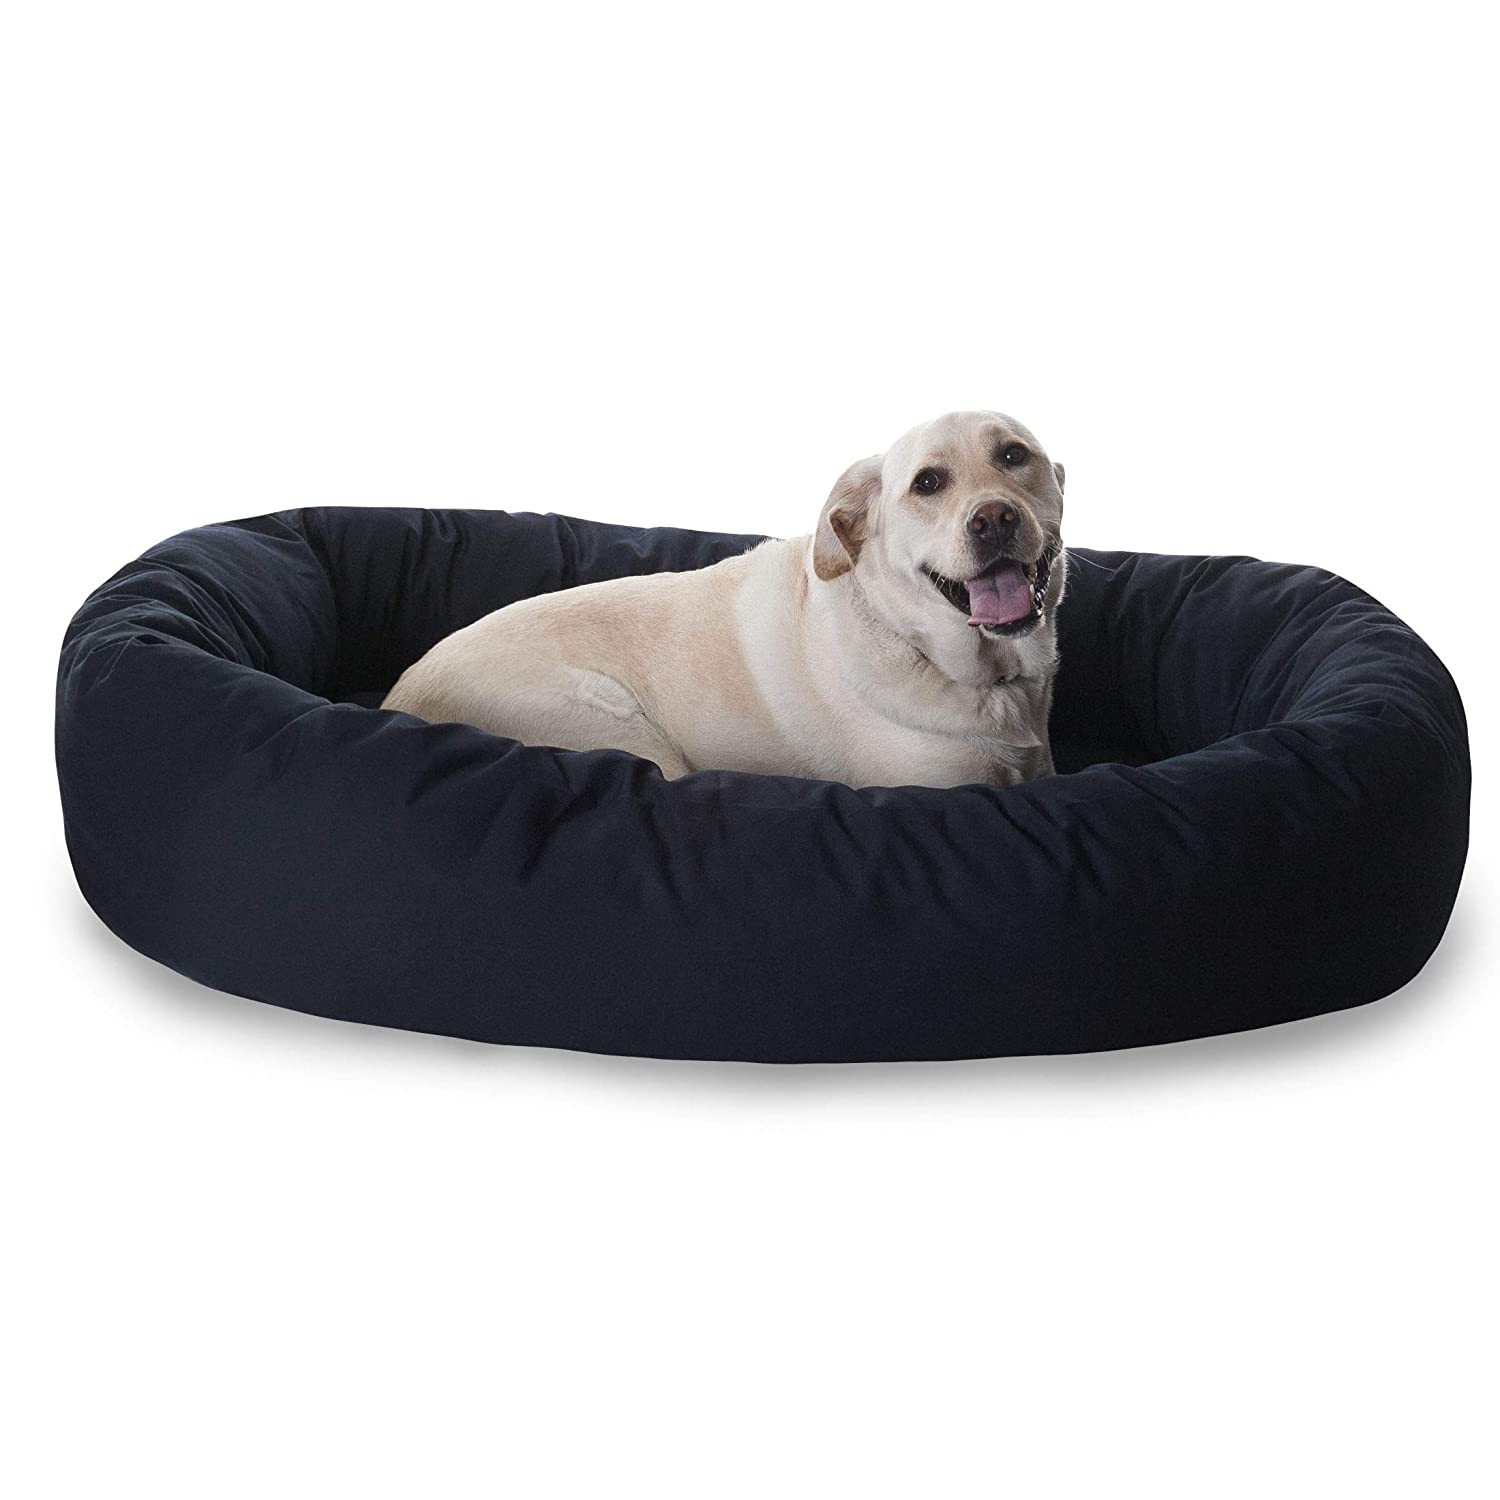 Majestic Pet Products Bagel Dog Bed